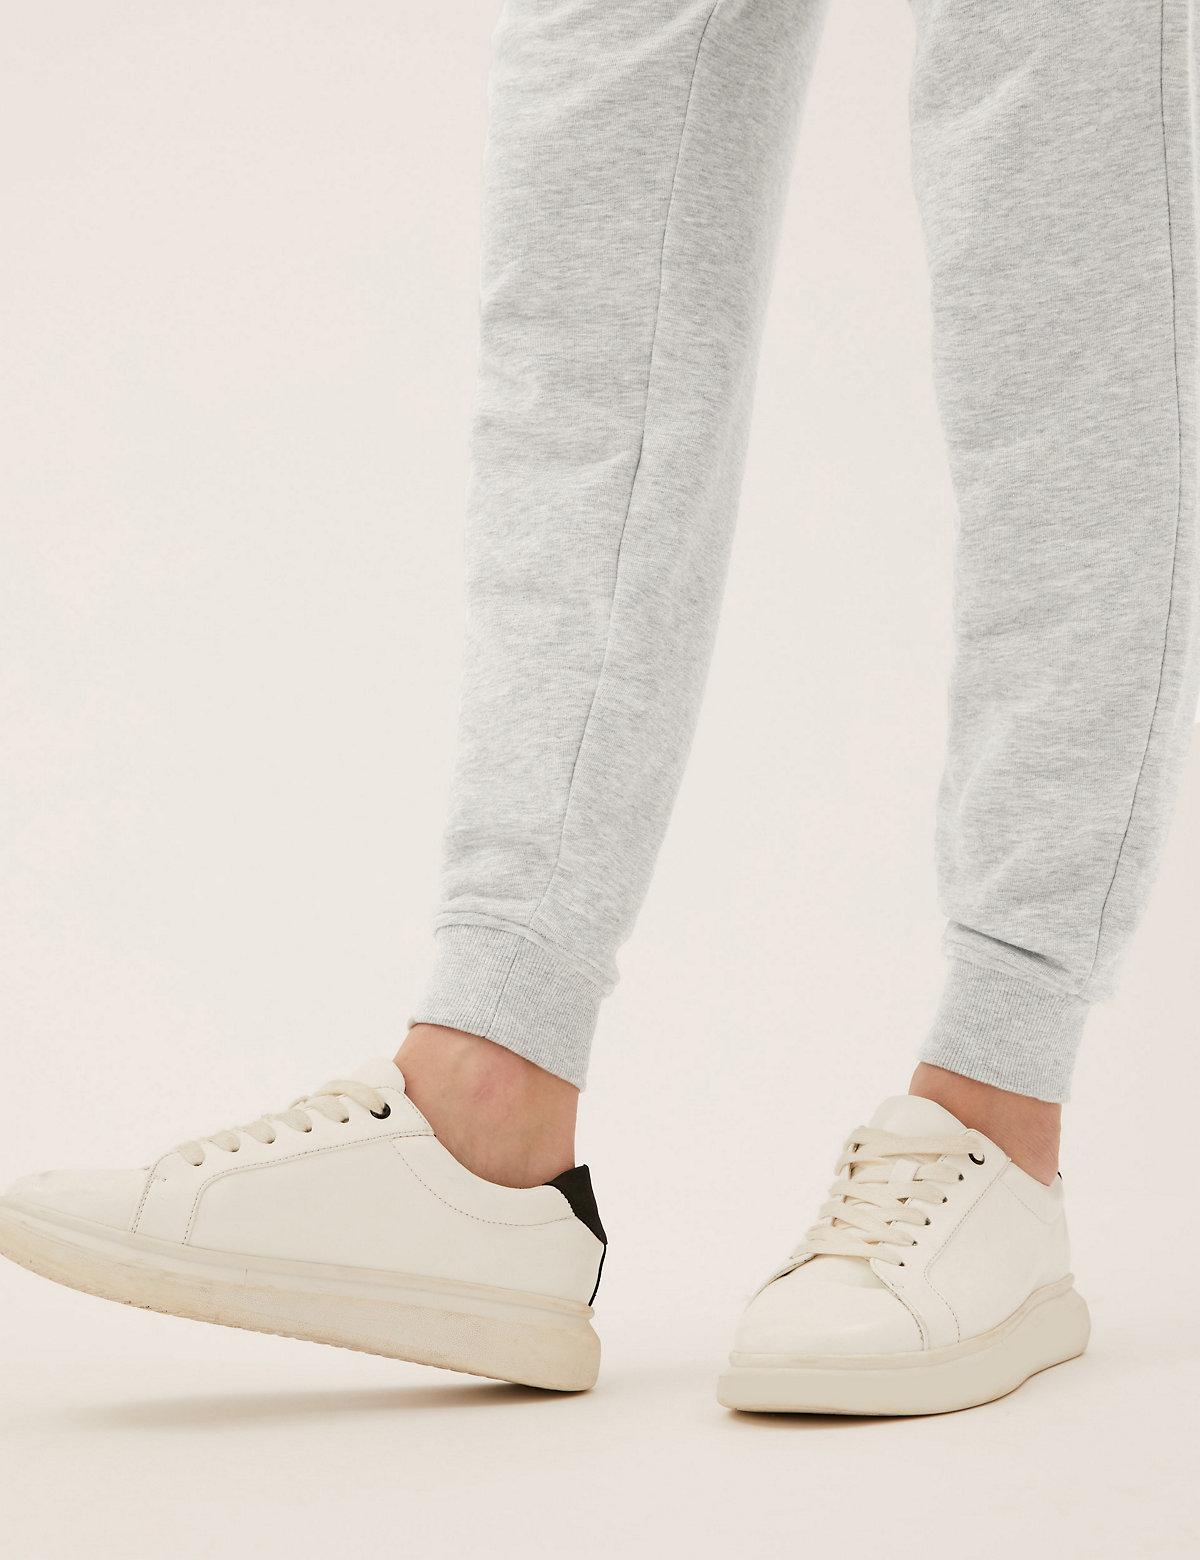 The Cotton Rich Cuffed Joggers